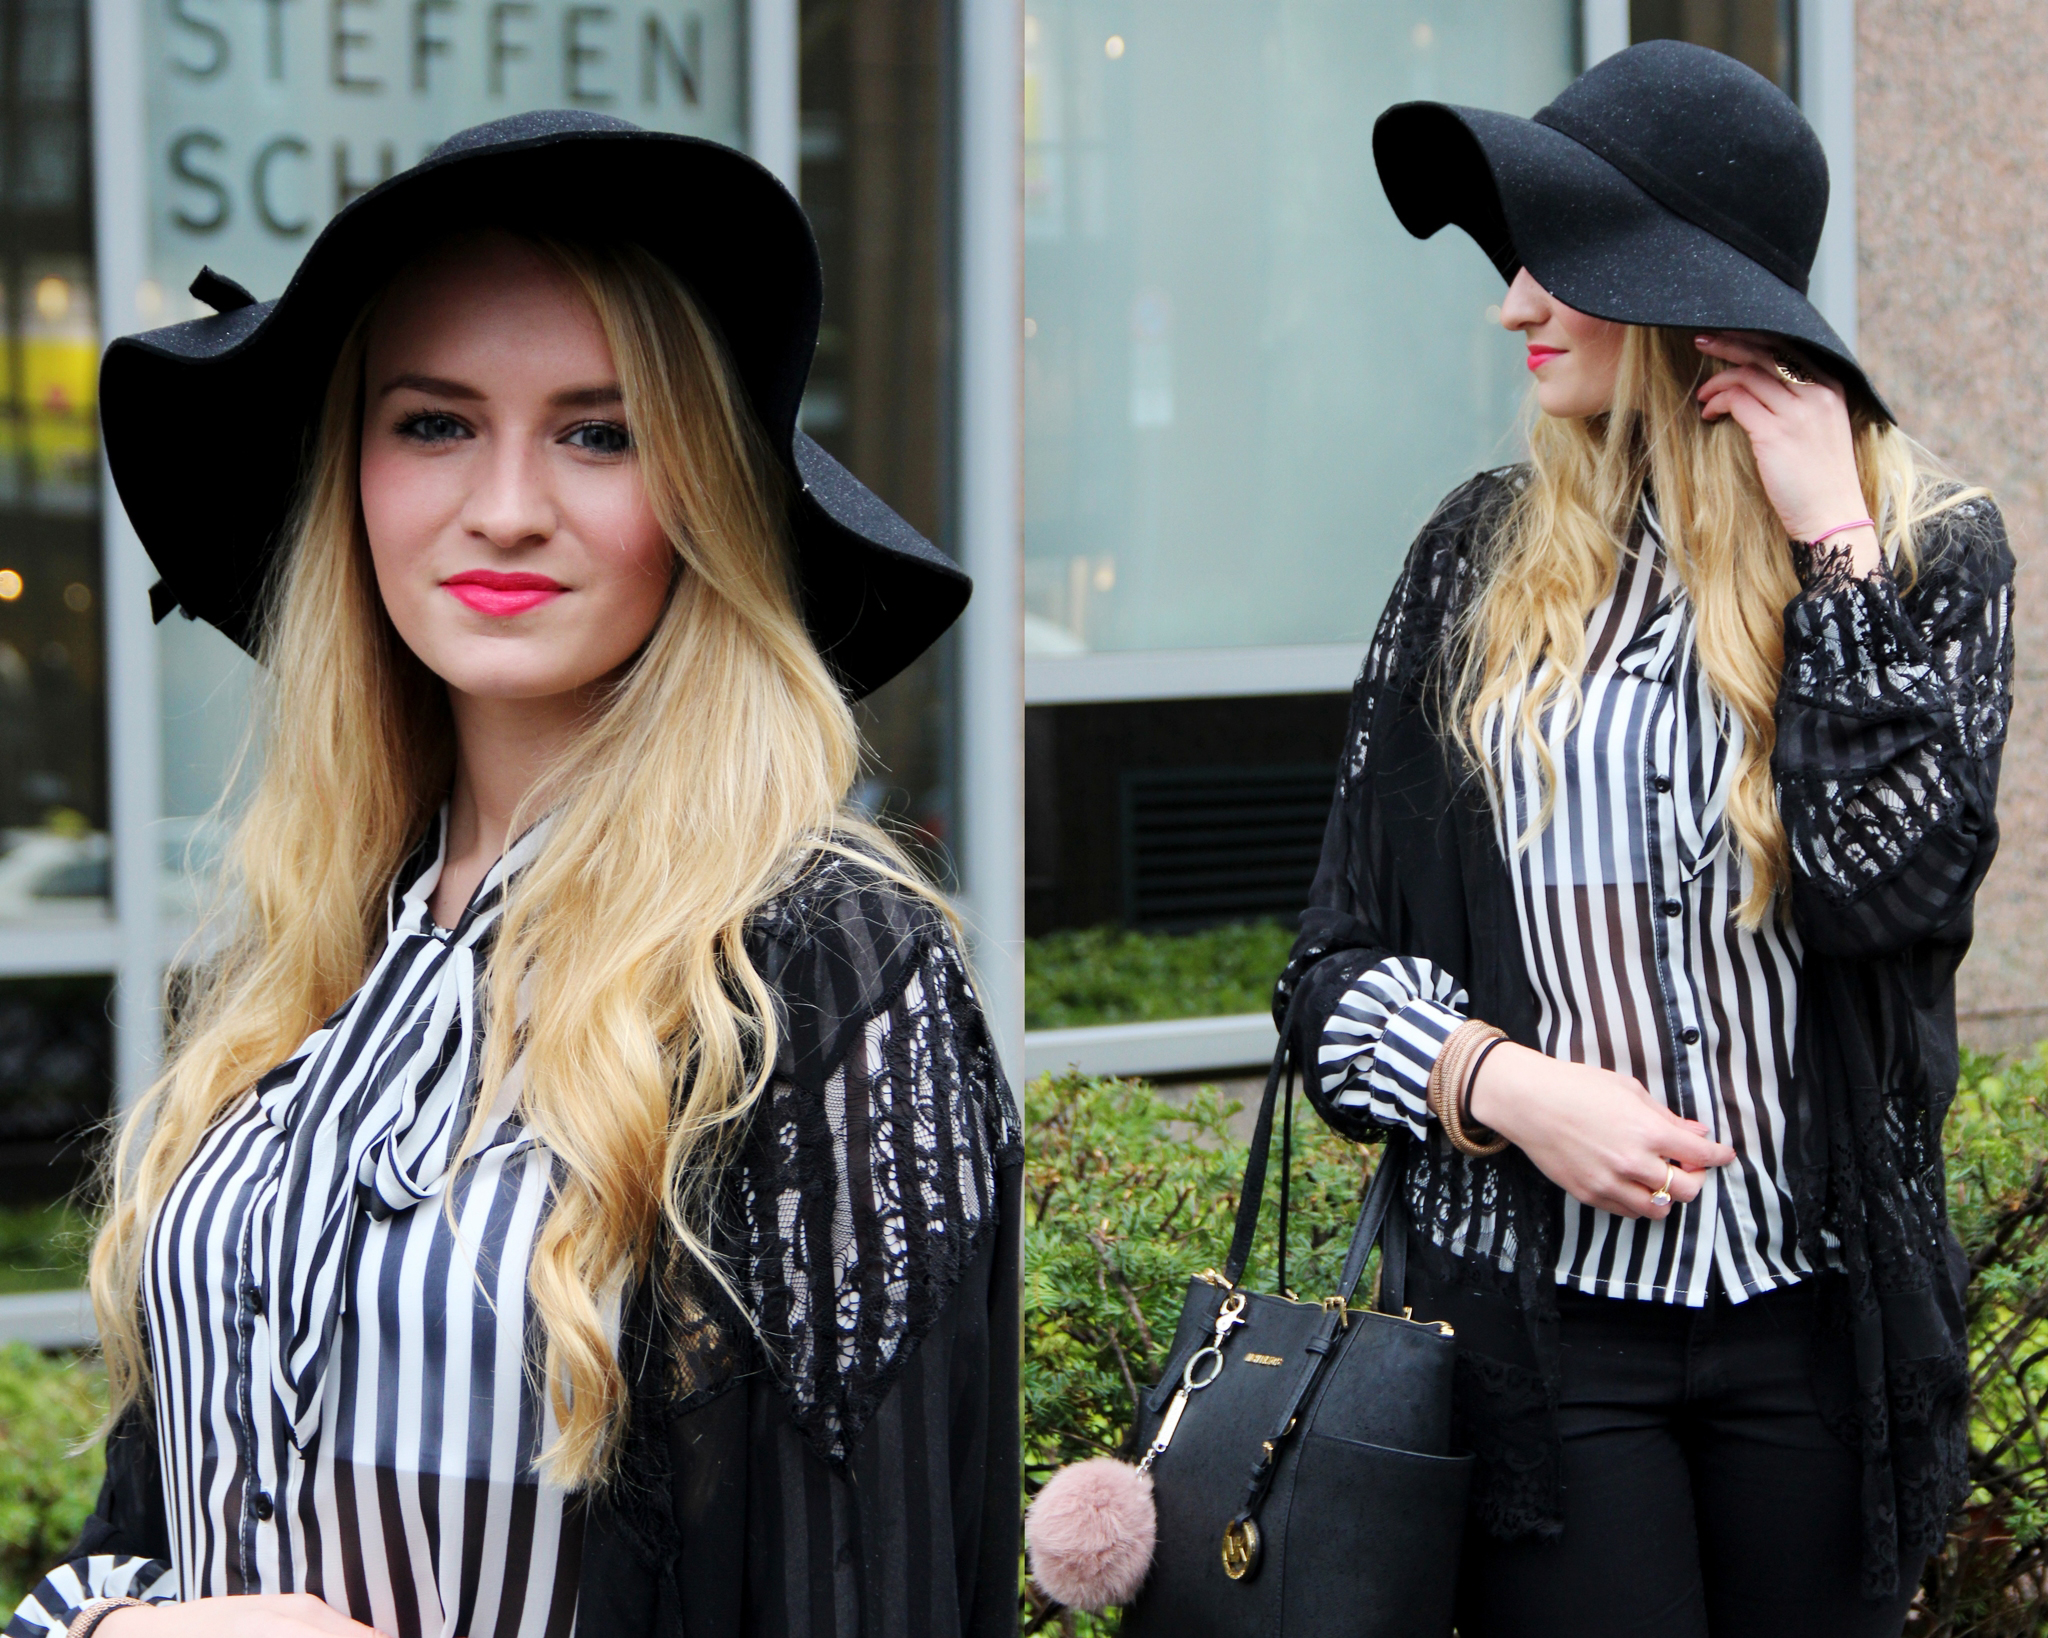 & Mrs. Fedora Blouse - Brightside Striped Outfit: